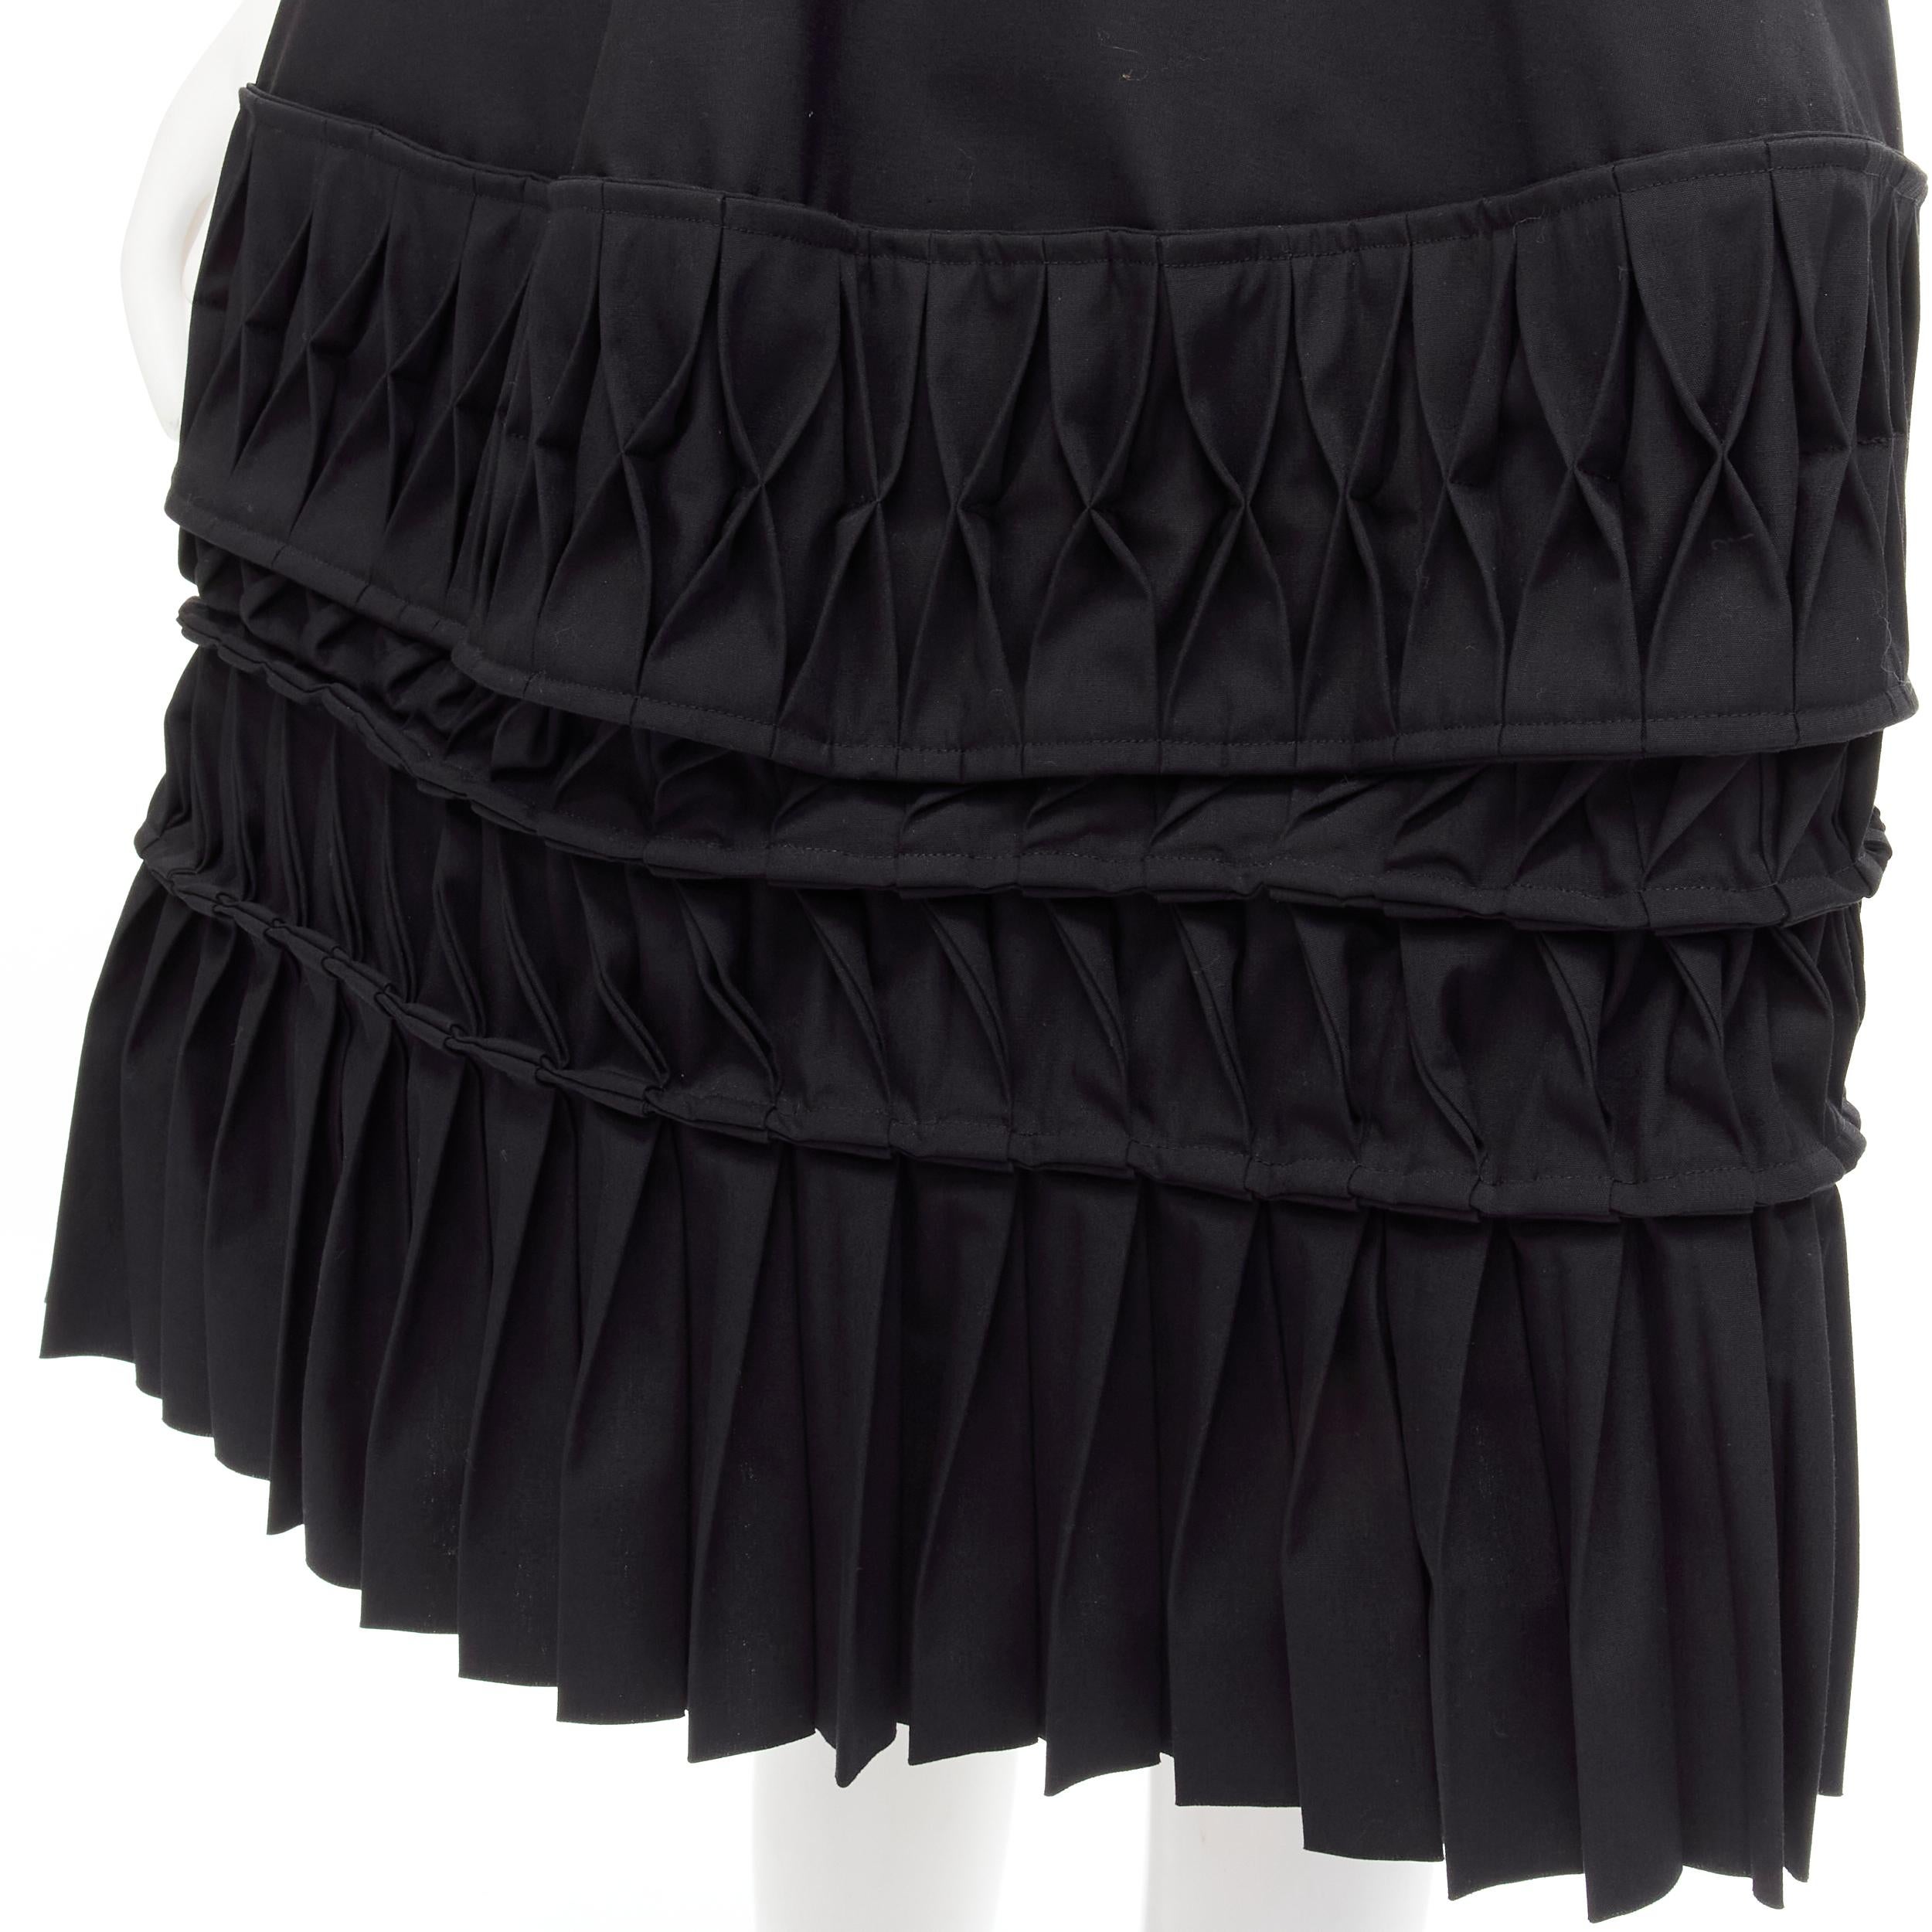 JUNYA WATANABE 1999 Runway Vintage black 3D origami pleated wrap skirt 
Reference: CRTI/A00642 
Brand: Junya Watanabe 
Collection: 1999 Runway 
Material: Polyester 
Color: Black 
Pattern: Solid 
Closure: Self tie 
Extra Detail: 3D origami pleat